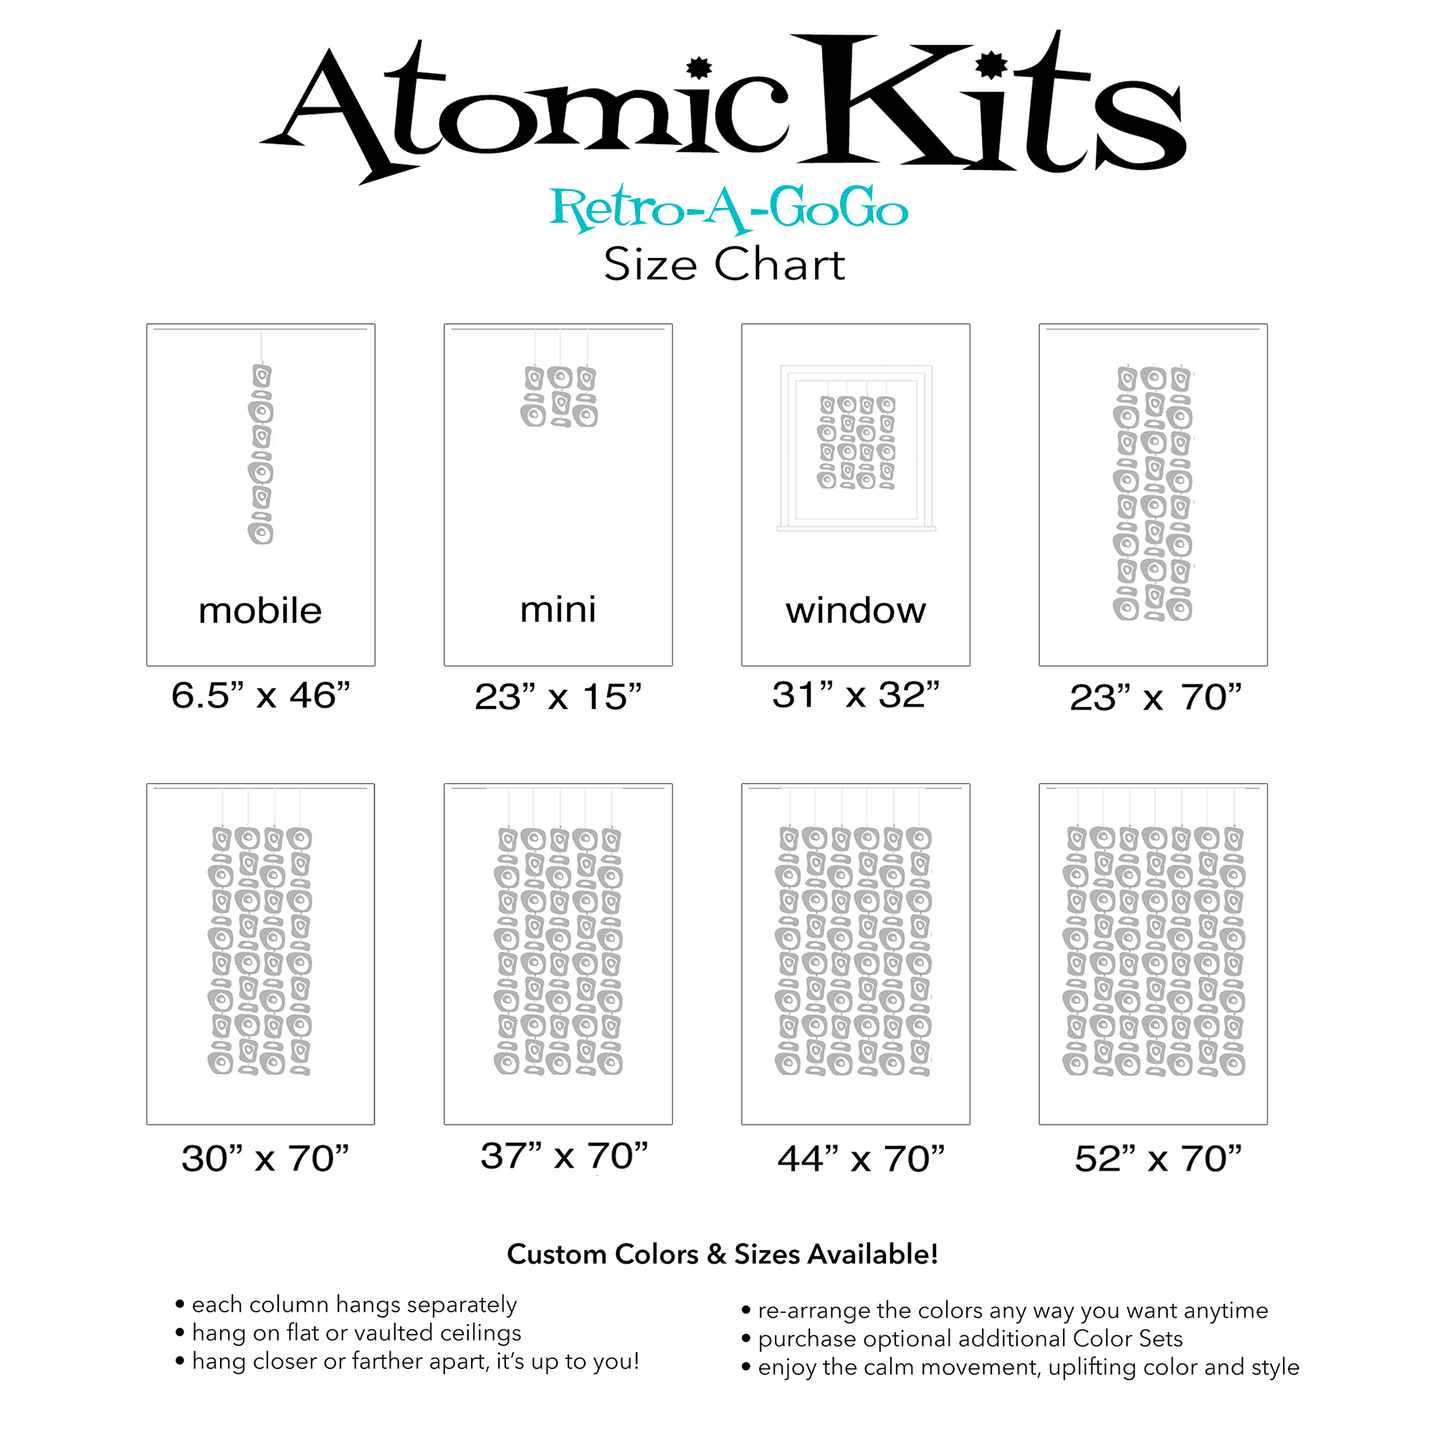 Size Chart for Retro-A-GoGo DIY KIT for mobiles, room dividers, and curtains  in Clear Lucite Acrylic by AtomicMobiles.com